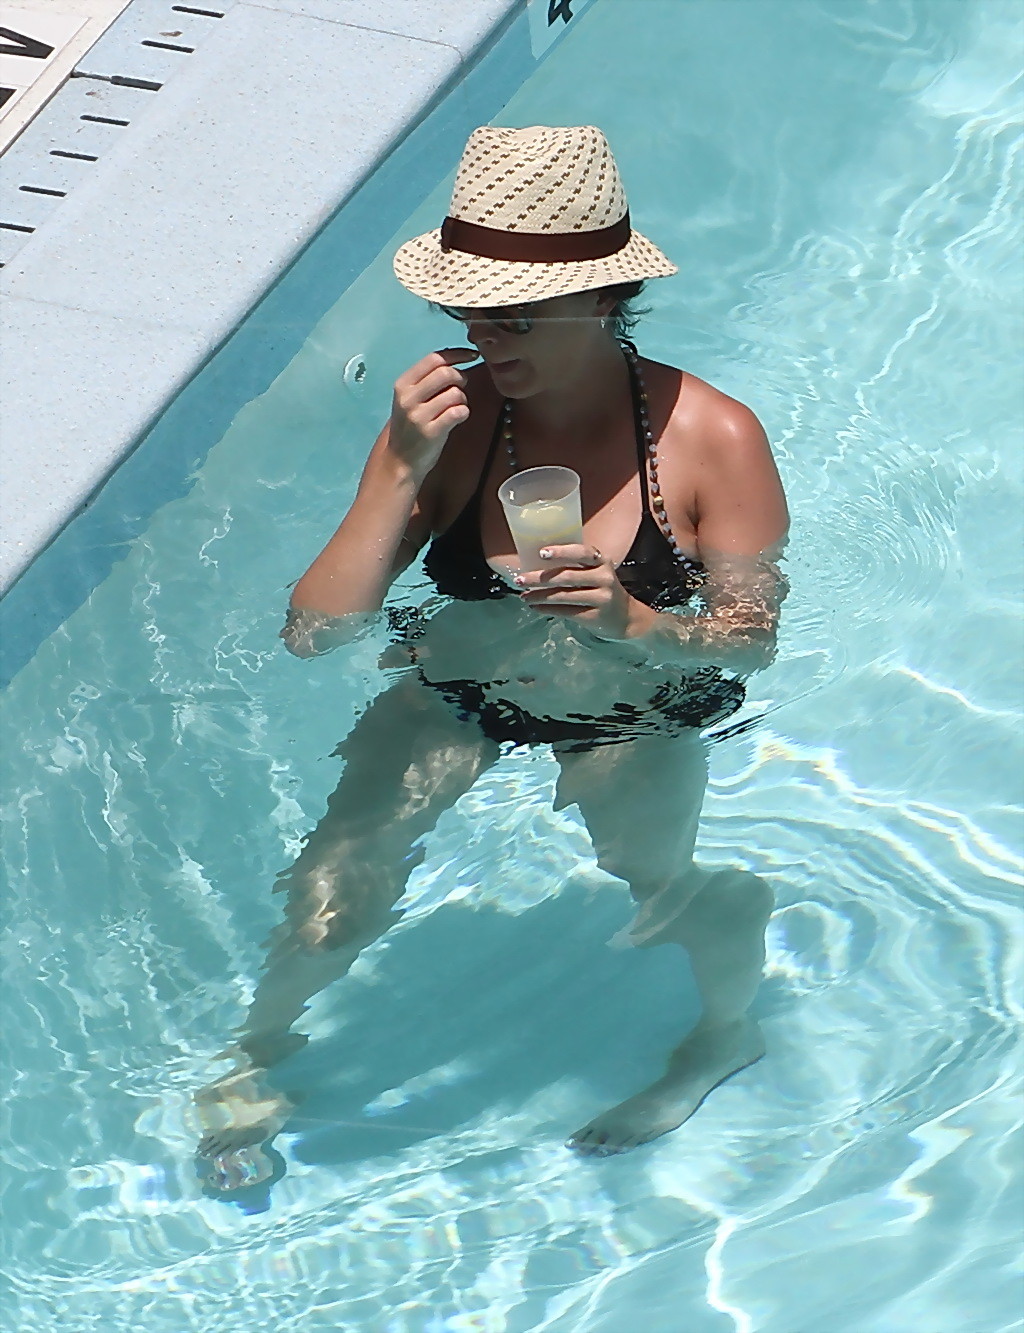 Katy Perry showing off her curvy body in skimpy black bikini at the pool in Miam #75256054